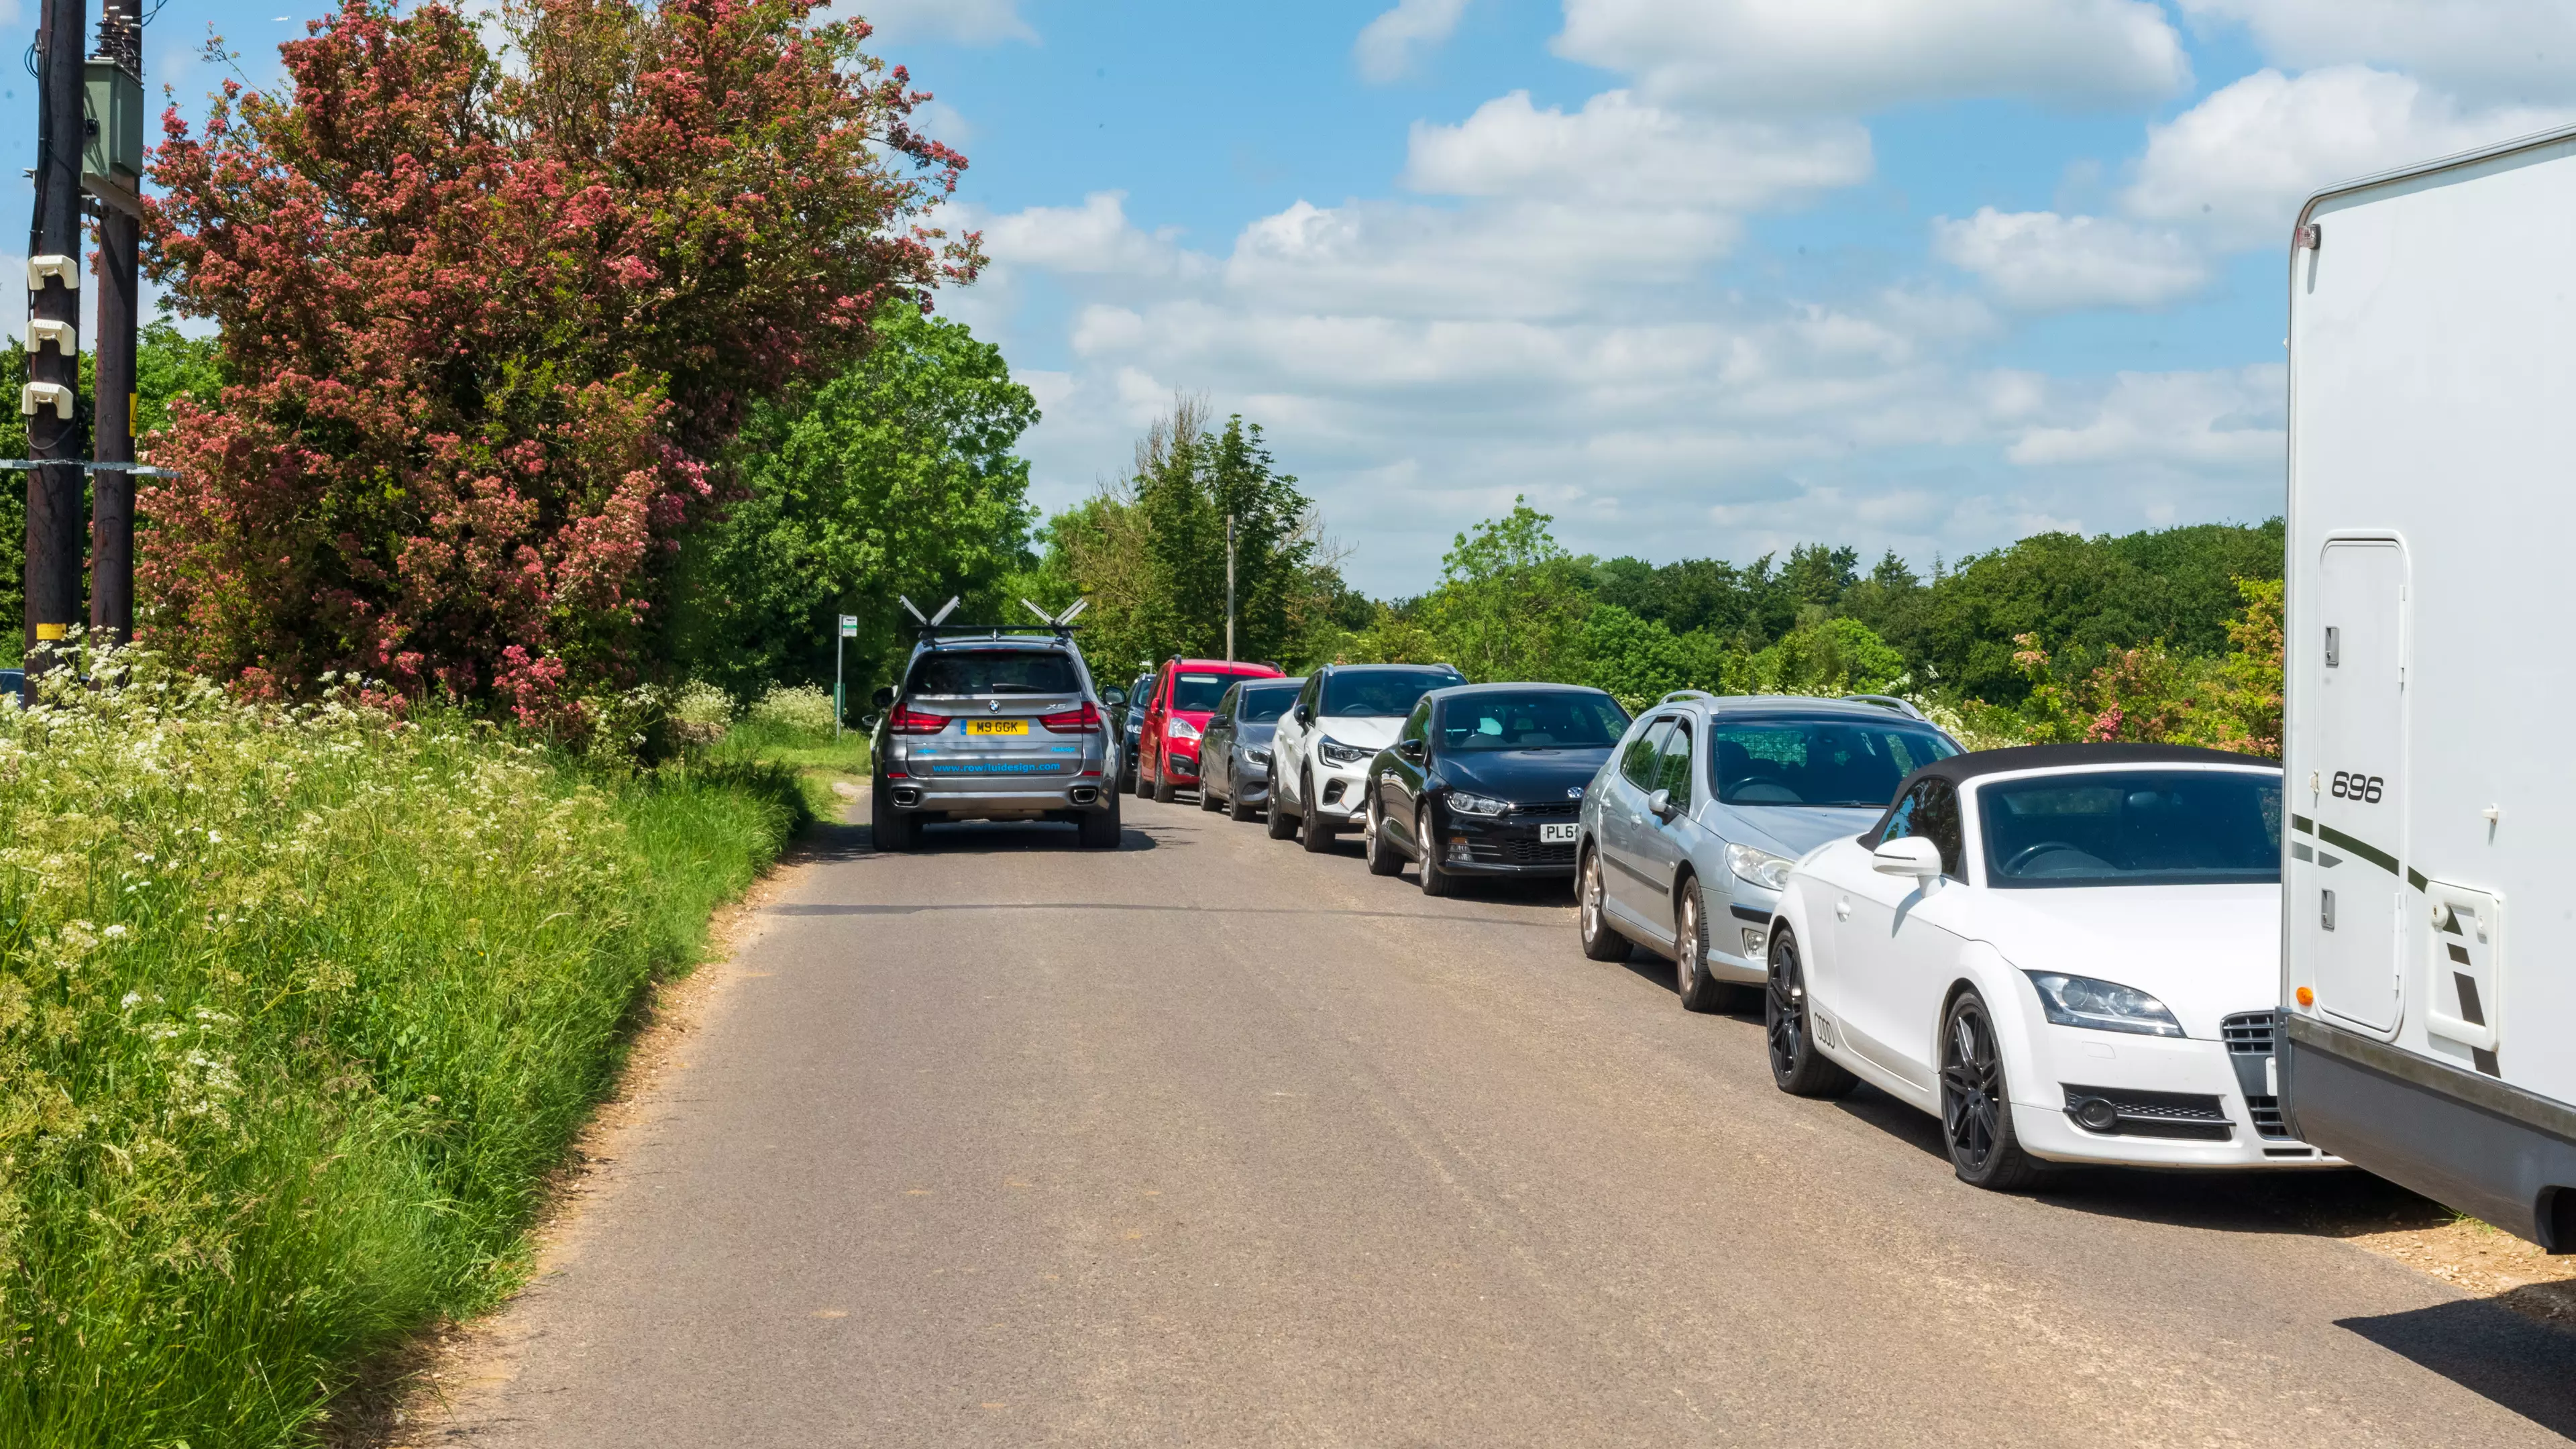 Police Called As Fans Swarm To Jeremy Clarkson's Farm Causing Huge Queues 